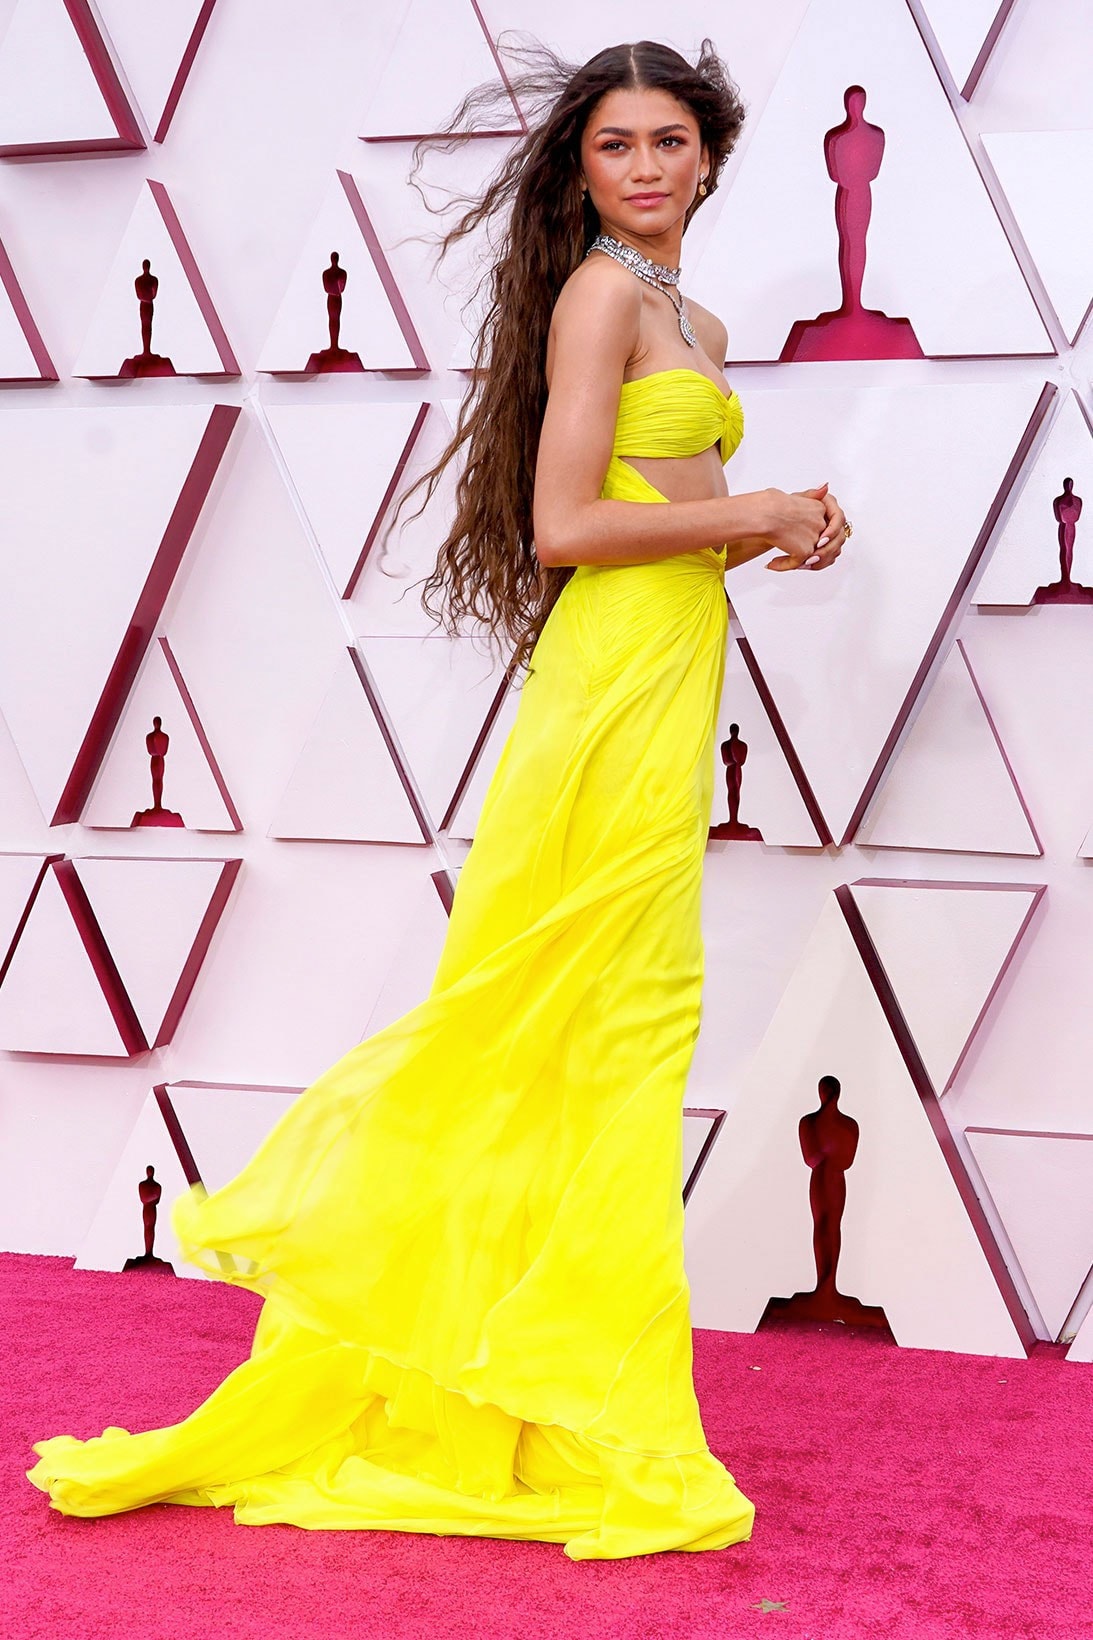 Zendaya Coleman Dune London Red Carpet Event Look Outfit Actor Rick Owens Dress Gown Cream White Sequined Timothee Chalamet Alexander Mcqueen Suit Fashion Celebrity Style 